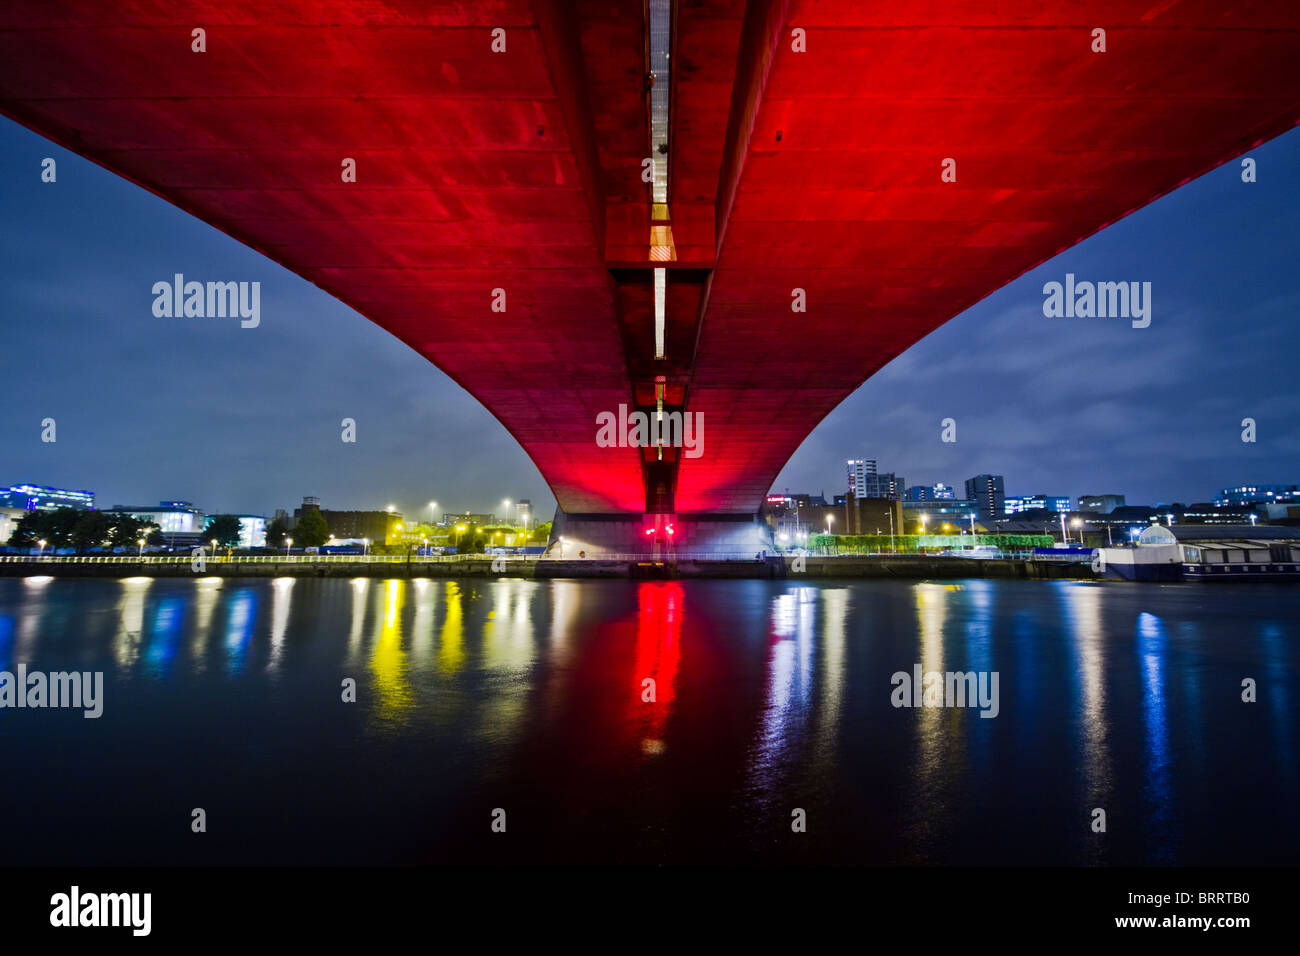 Glasgow's Kingston Bridge over the river Clyde at night. Stock Photo